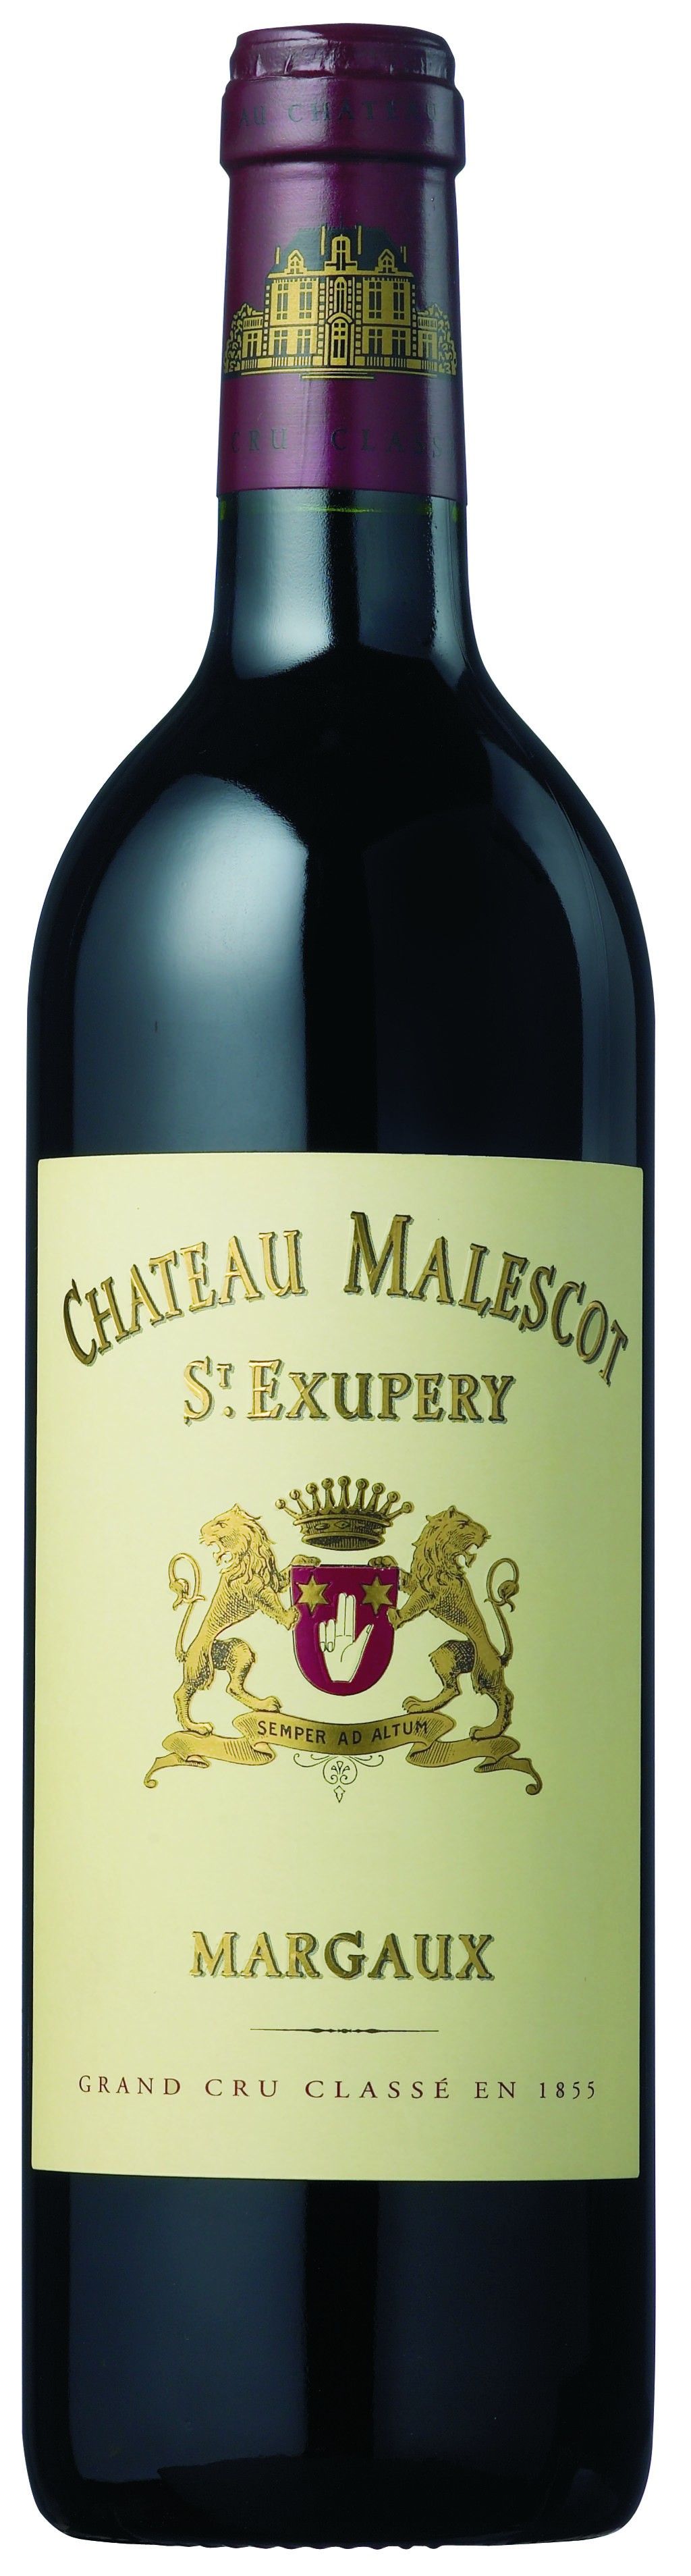 Chateau Malescot-St-Exupery, 2016